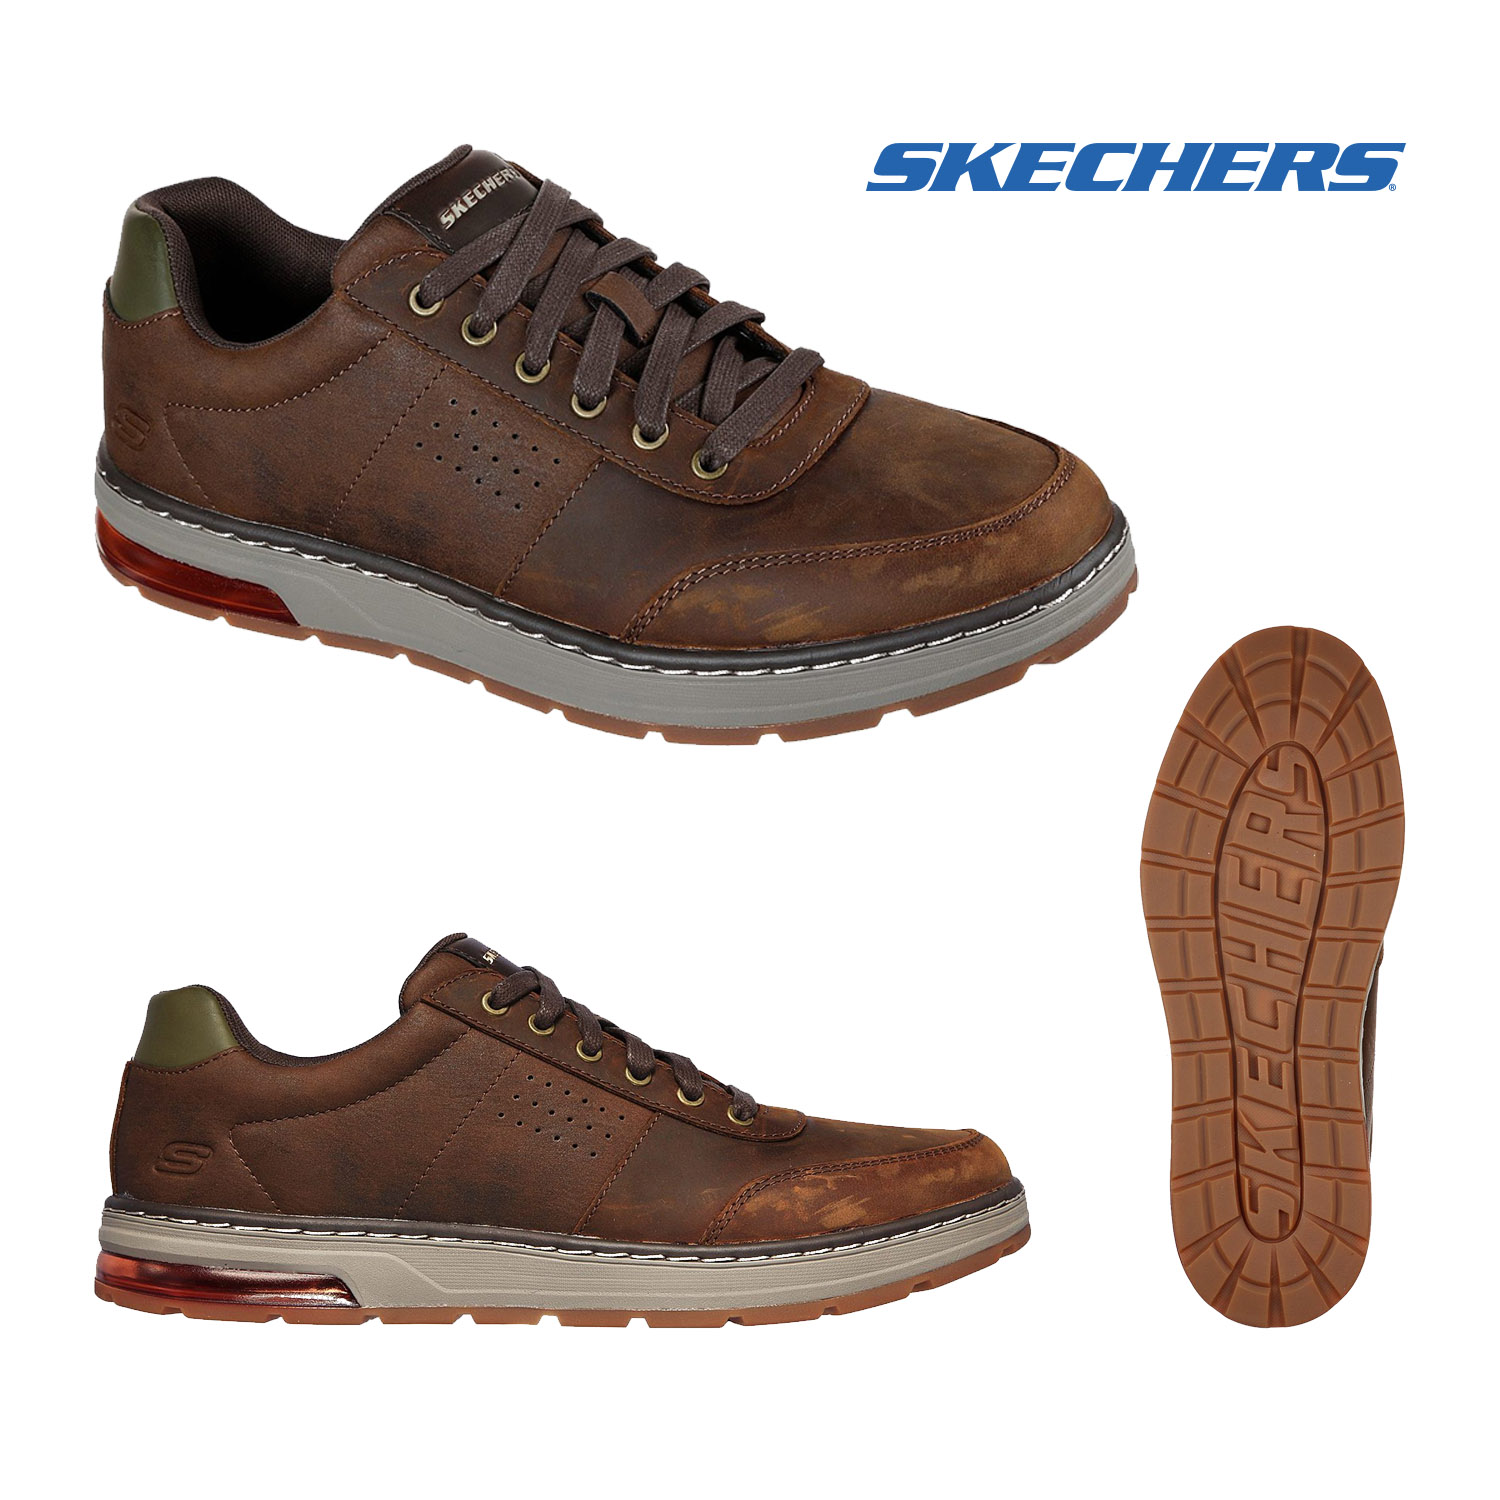 skechers mens brown leather lace up casual shoes